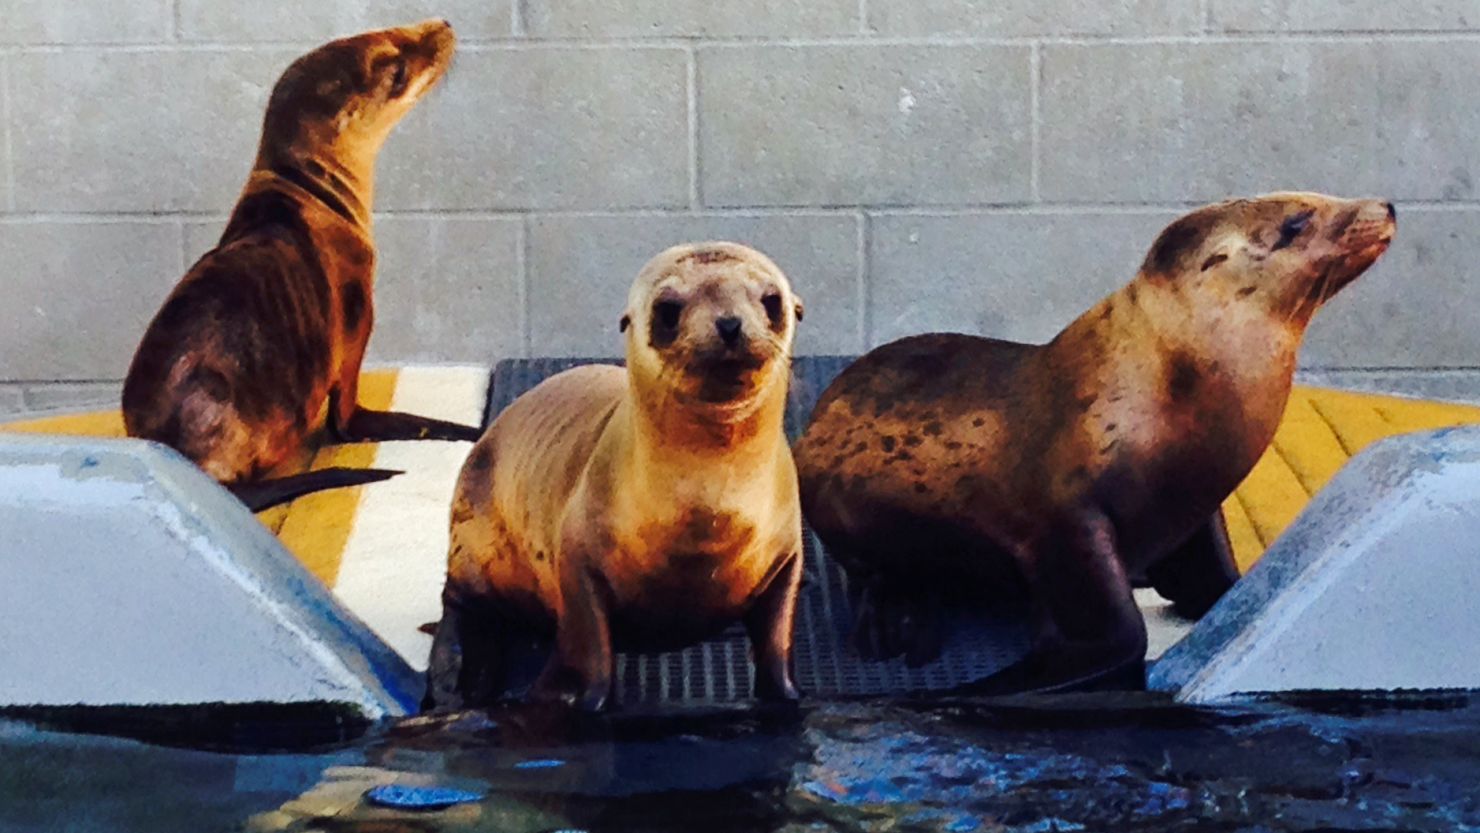 Hoppie, center, recovers with other sea lion pups at The Marine Mammal Center in Sausalito, California.